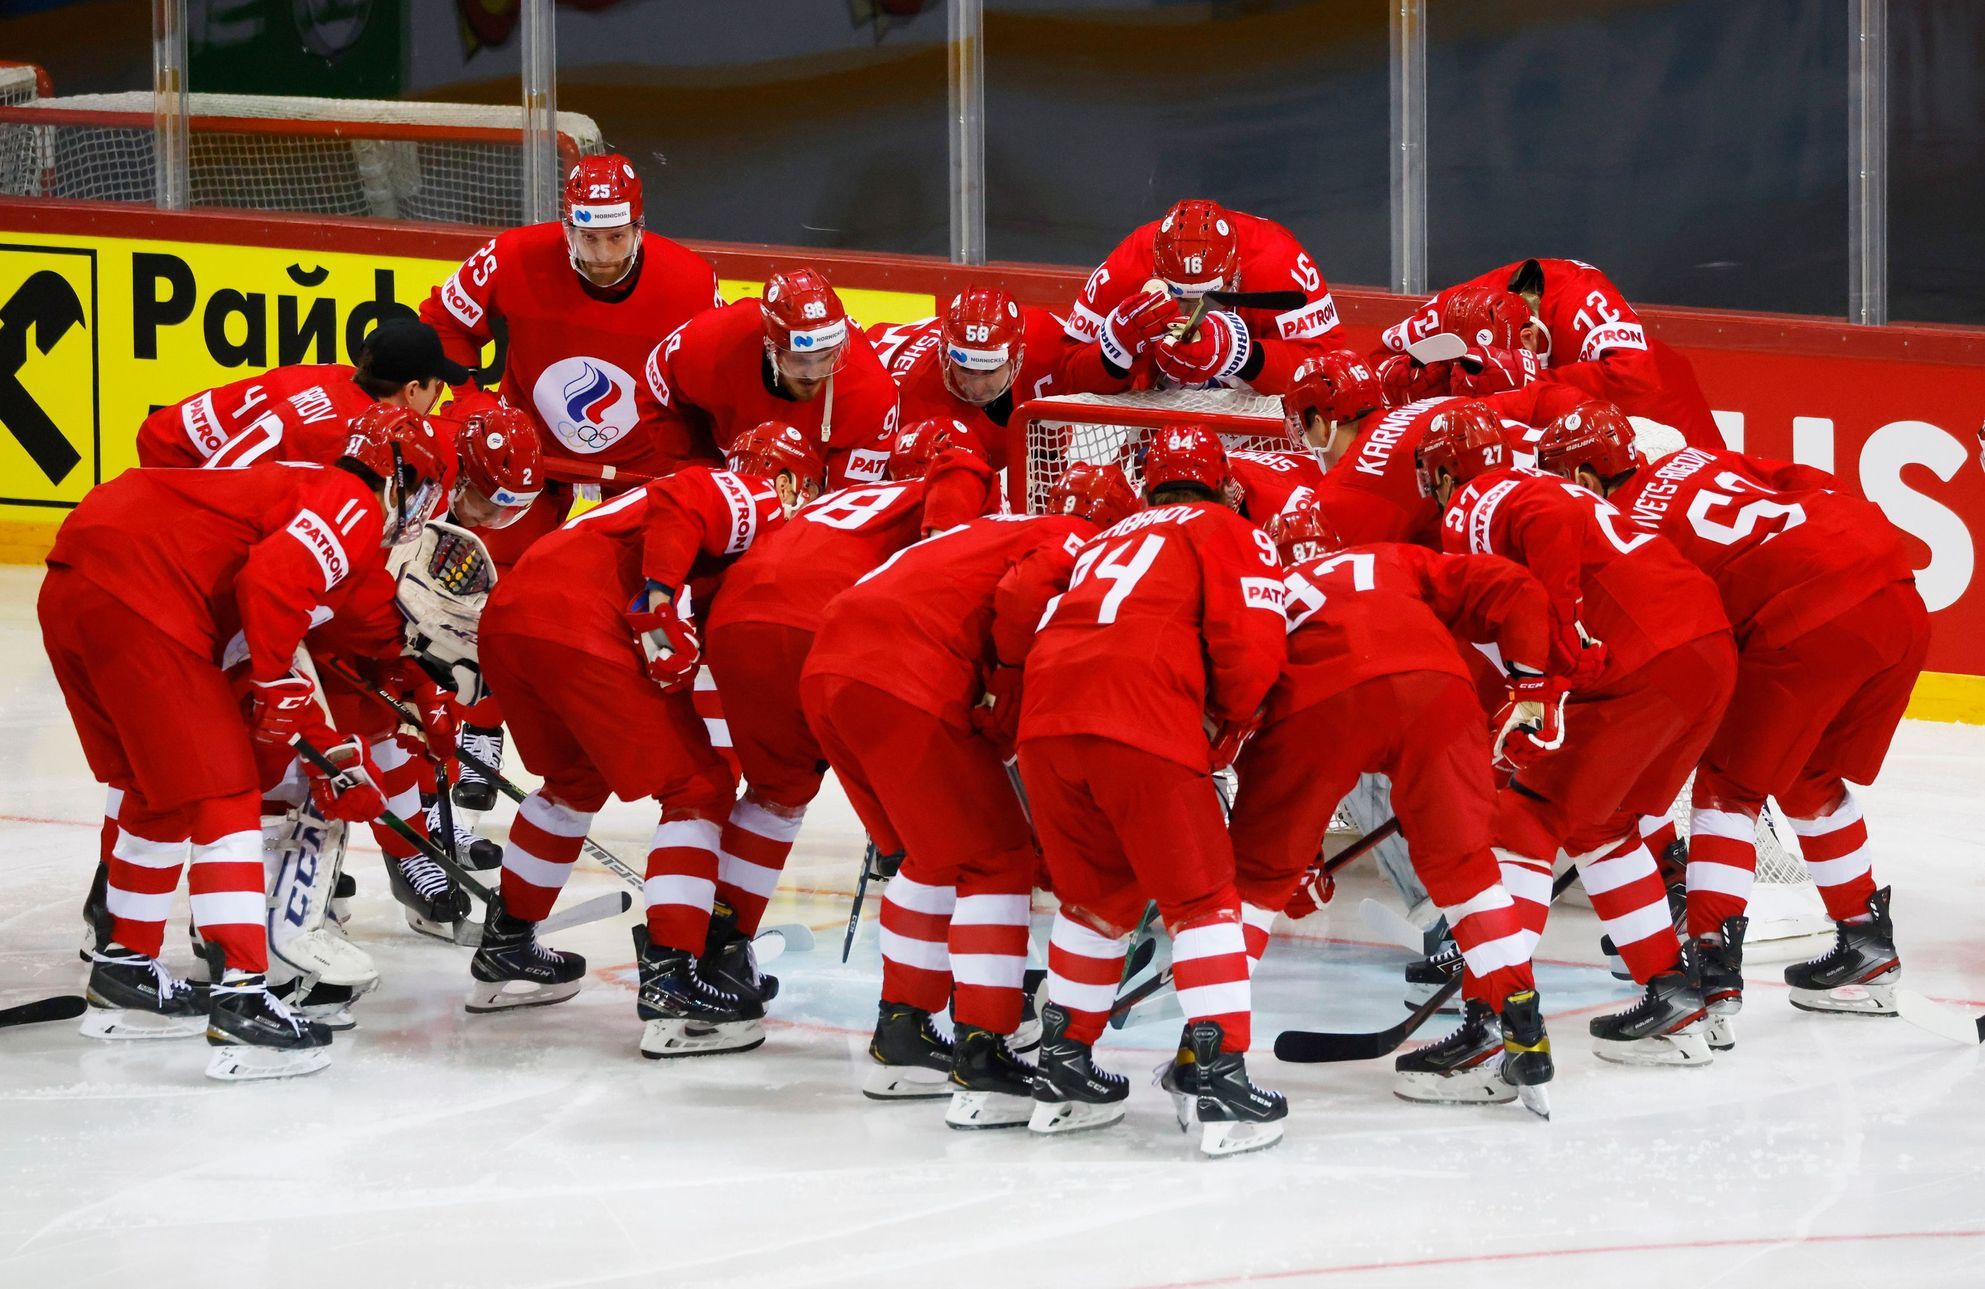 The International Hockey Federation has excluded Russia and Belarus from this year’s World Cup